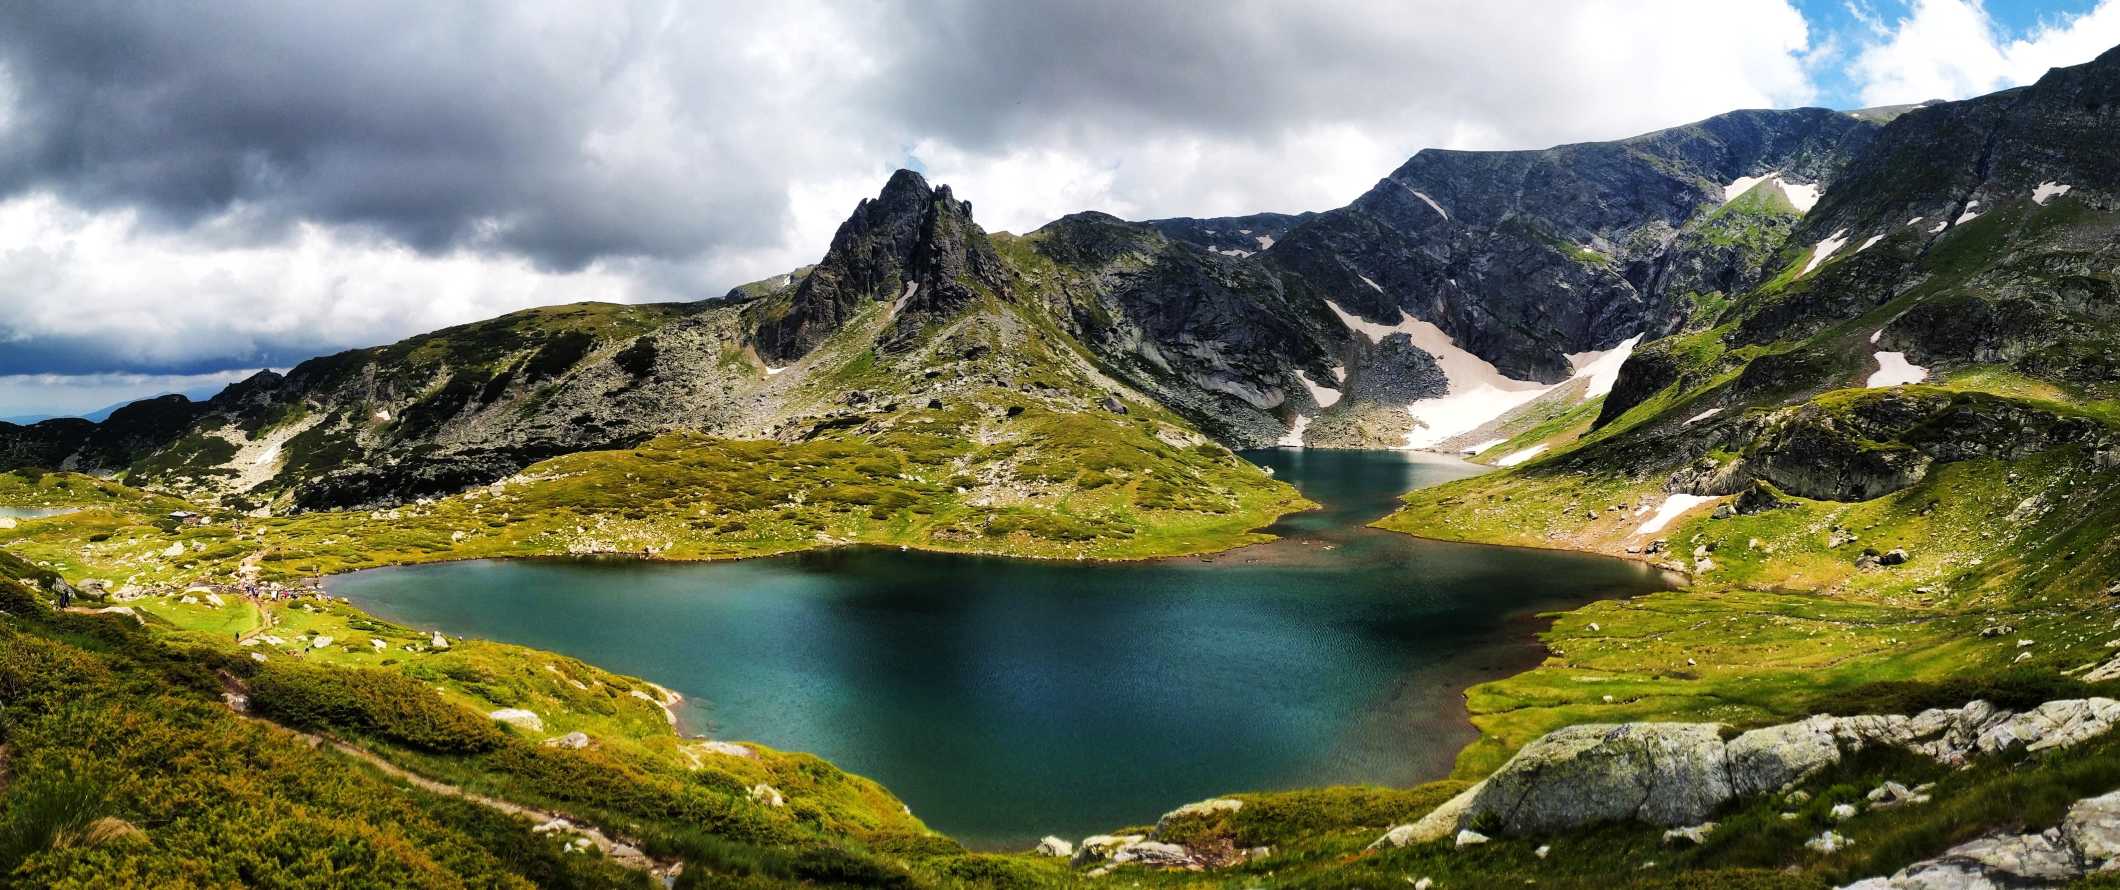 An emerald green lake with sharp jagged peaks in the background in the Rila Mountains, Bulgaria